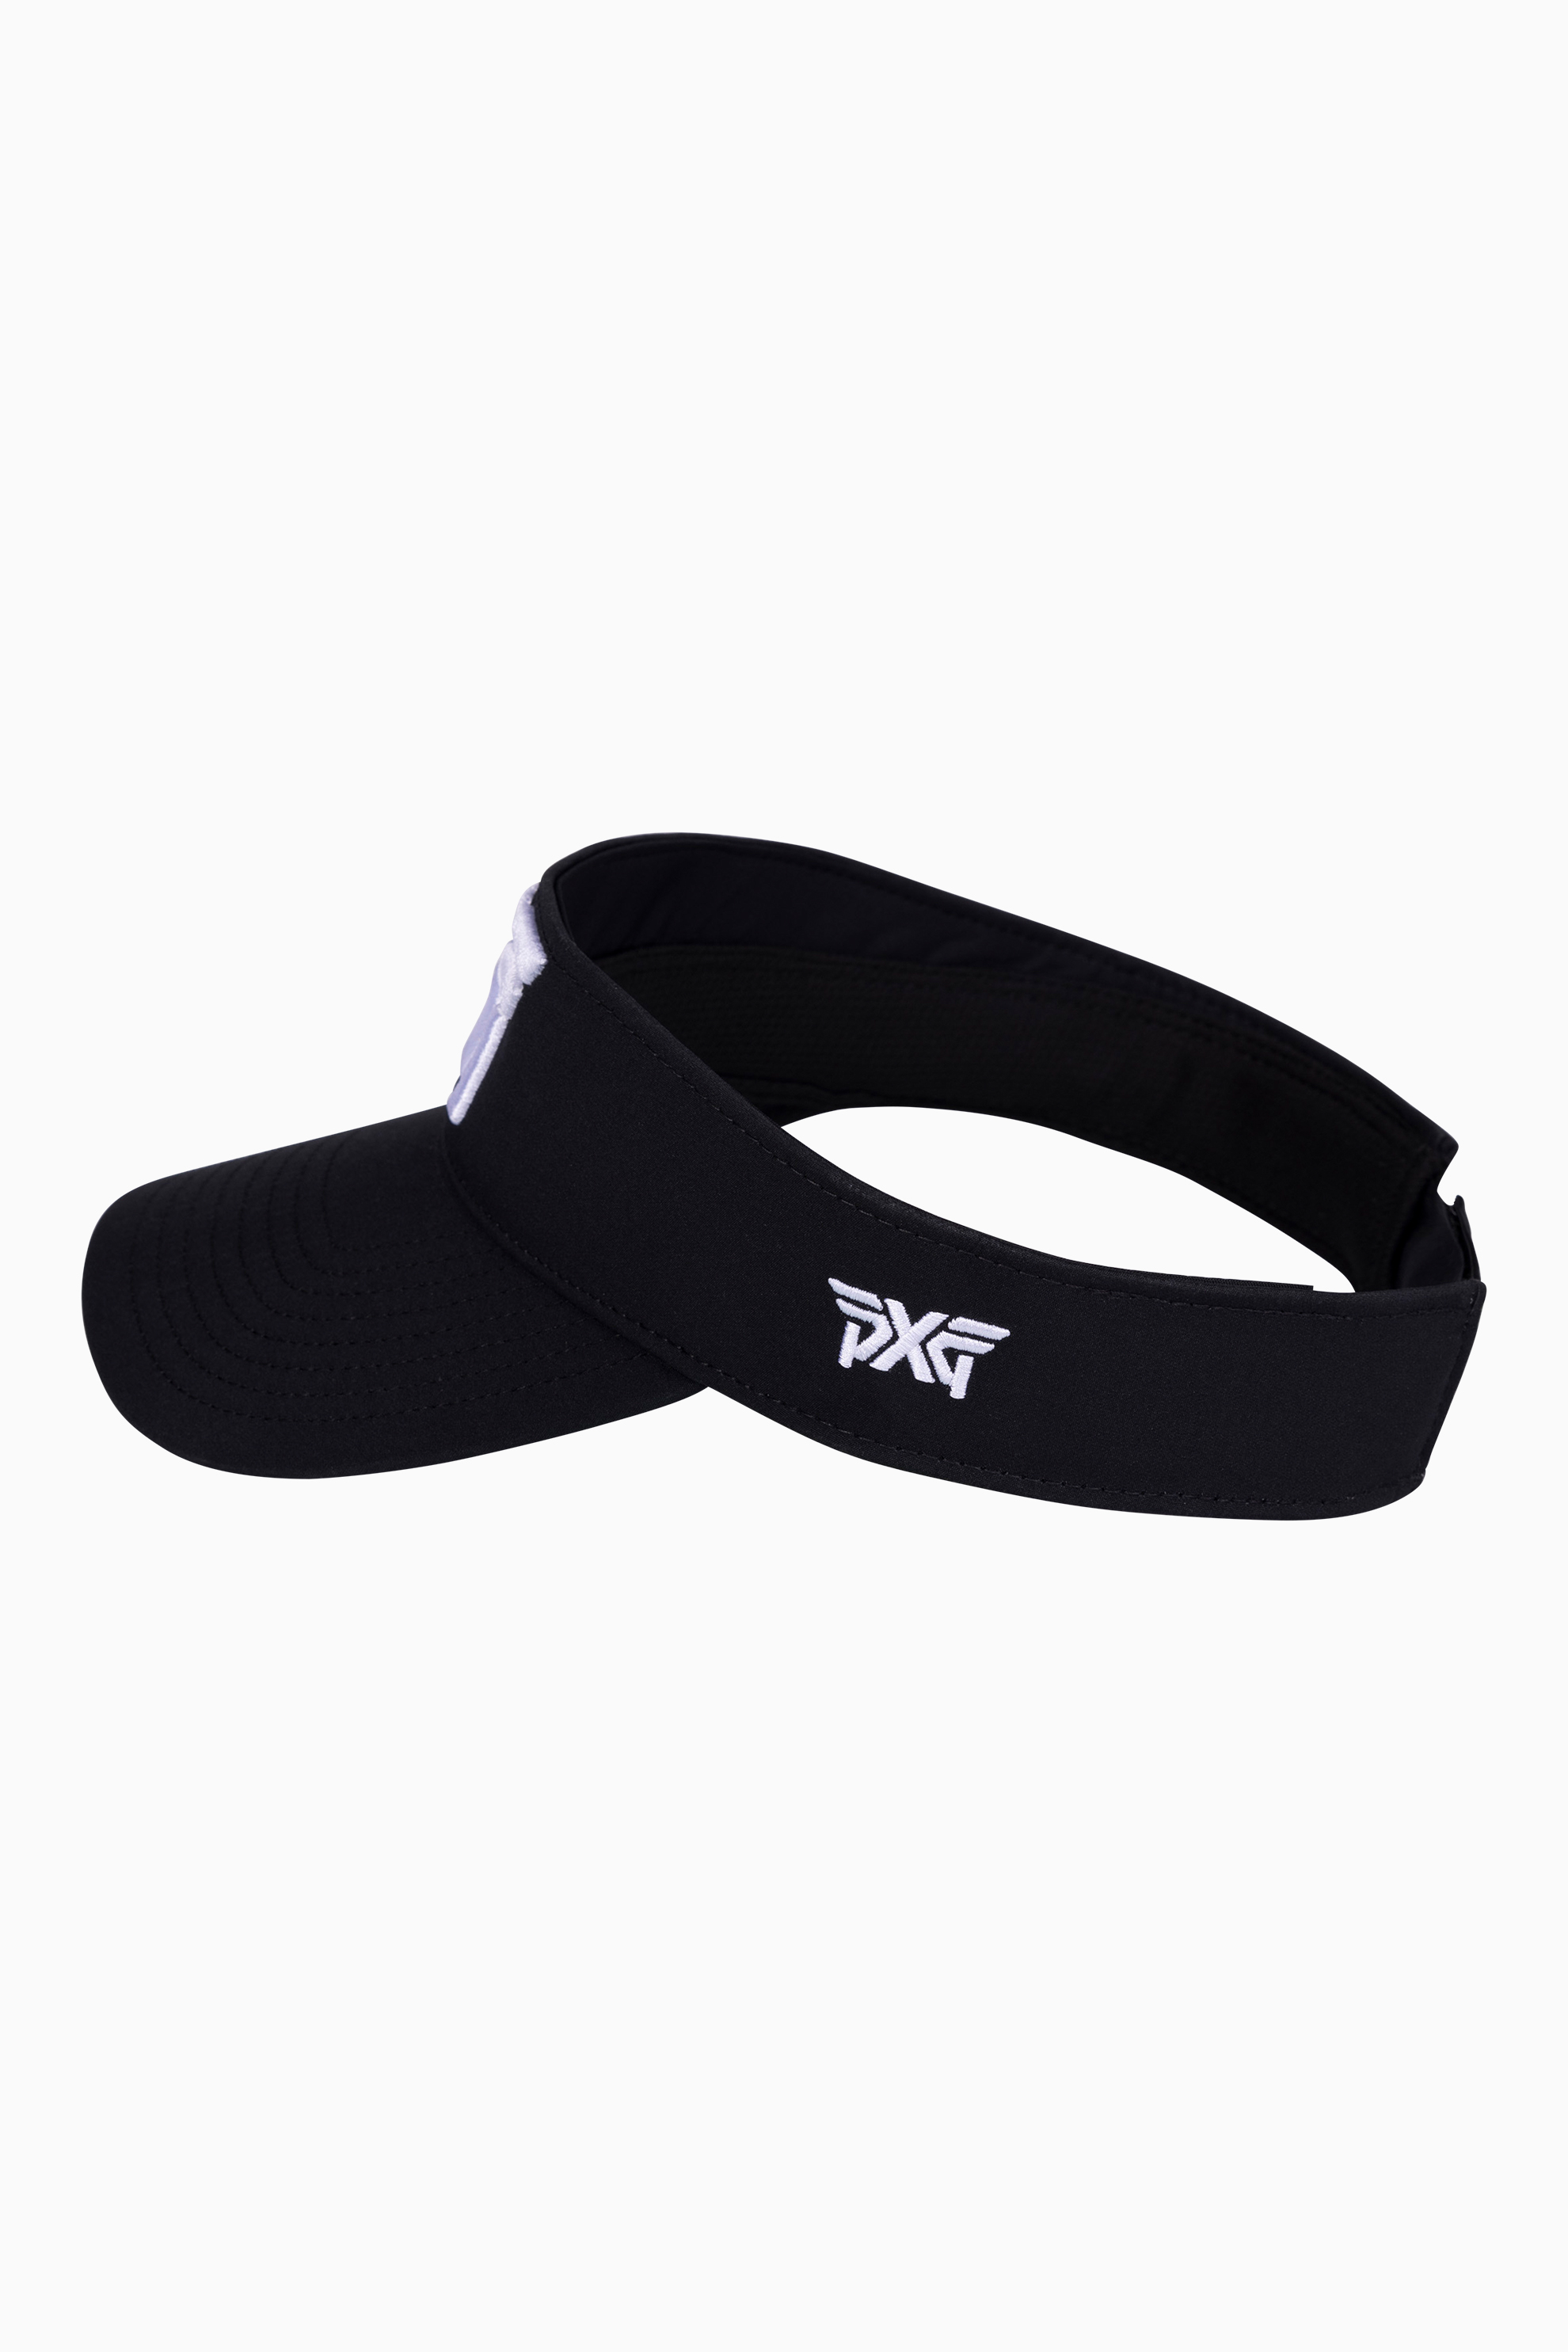 Sport Visor | Golf Quality and Highest Apparel, Golf Clubs at Shop Gear, the Accessories PXG